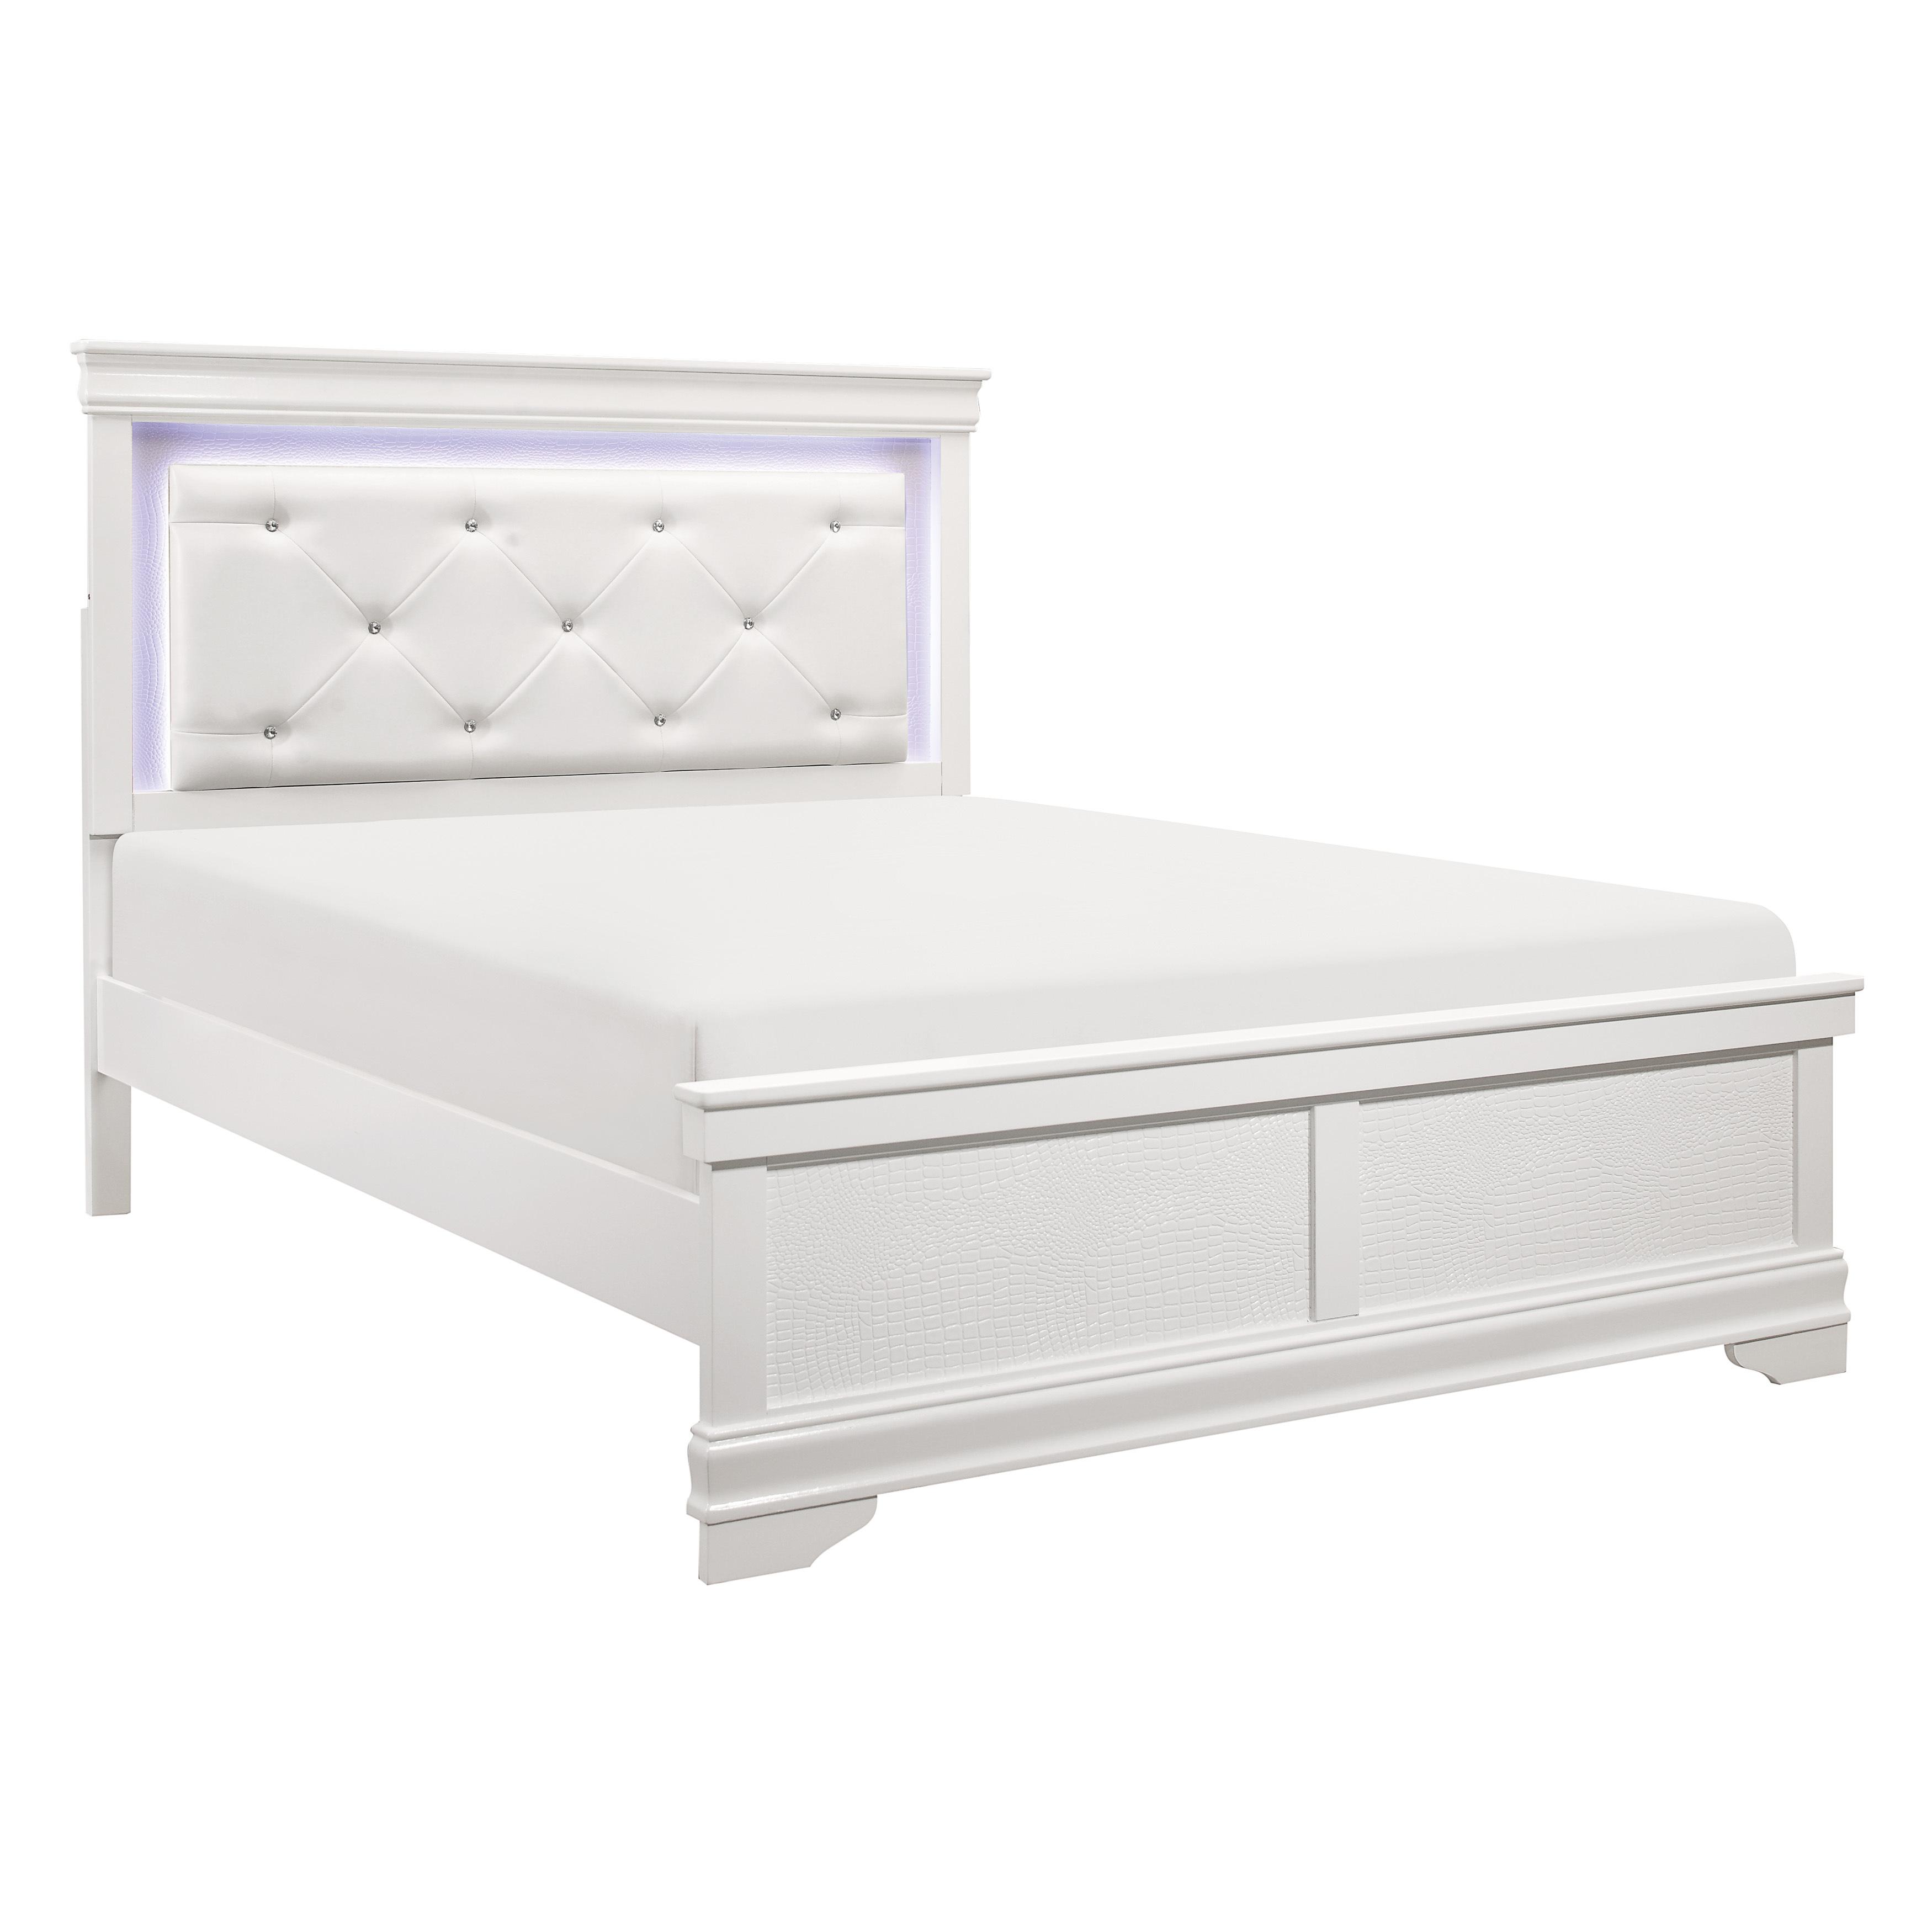 Traditional Bed 1556WF-1* Lana 1556WF-1* in White Faux Leather